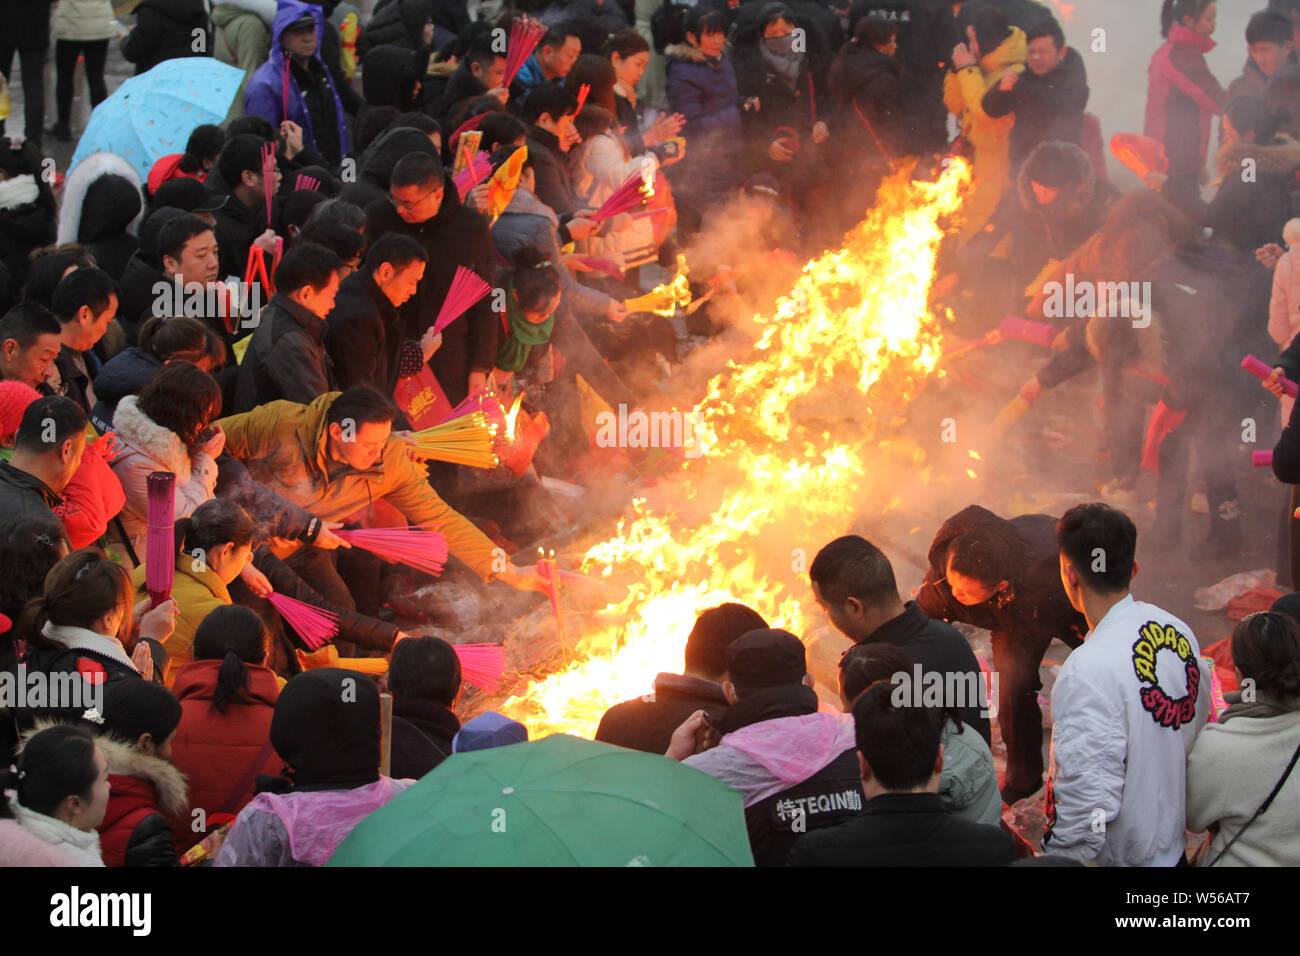 Chinese worshippers burn joss sticks (incenses) to pray for good fortune and blessing during the Chinese Lunar New Year or Spring Festival at the Guiy Stock Photo